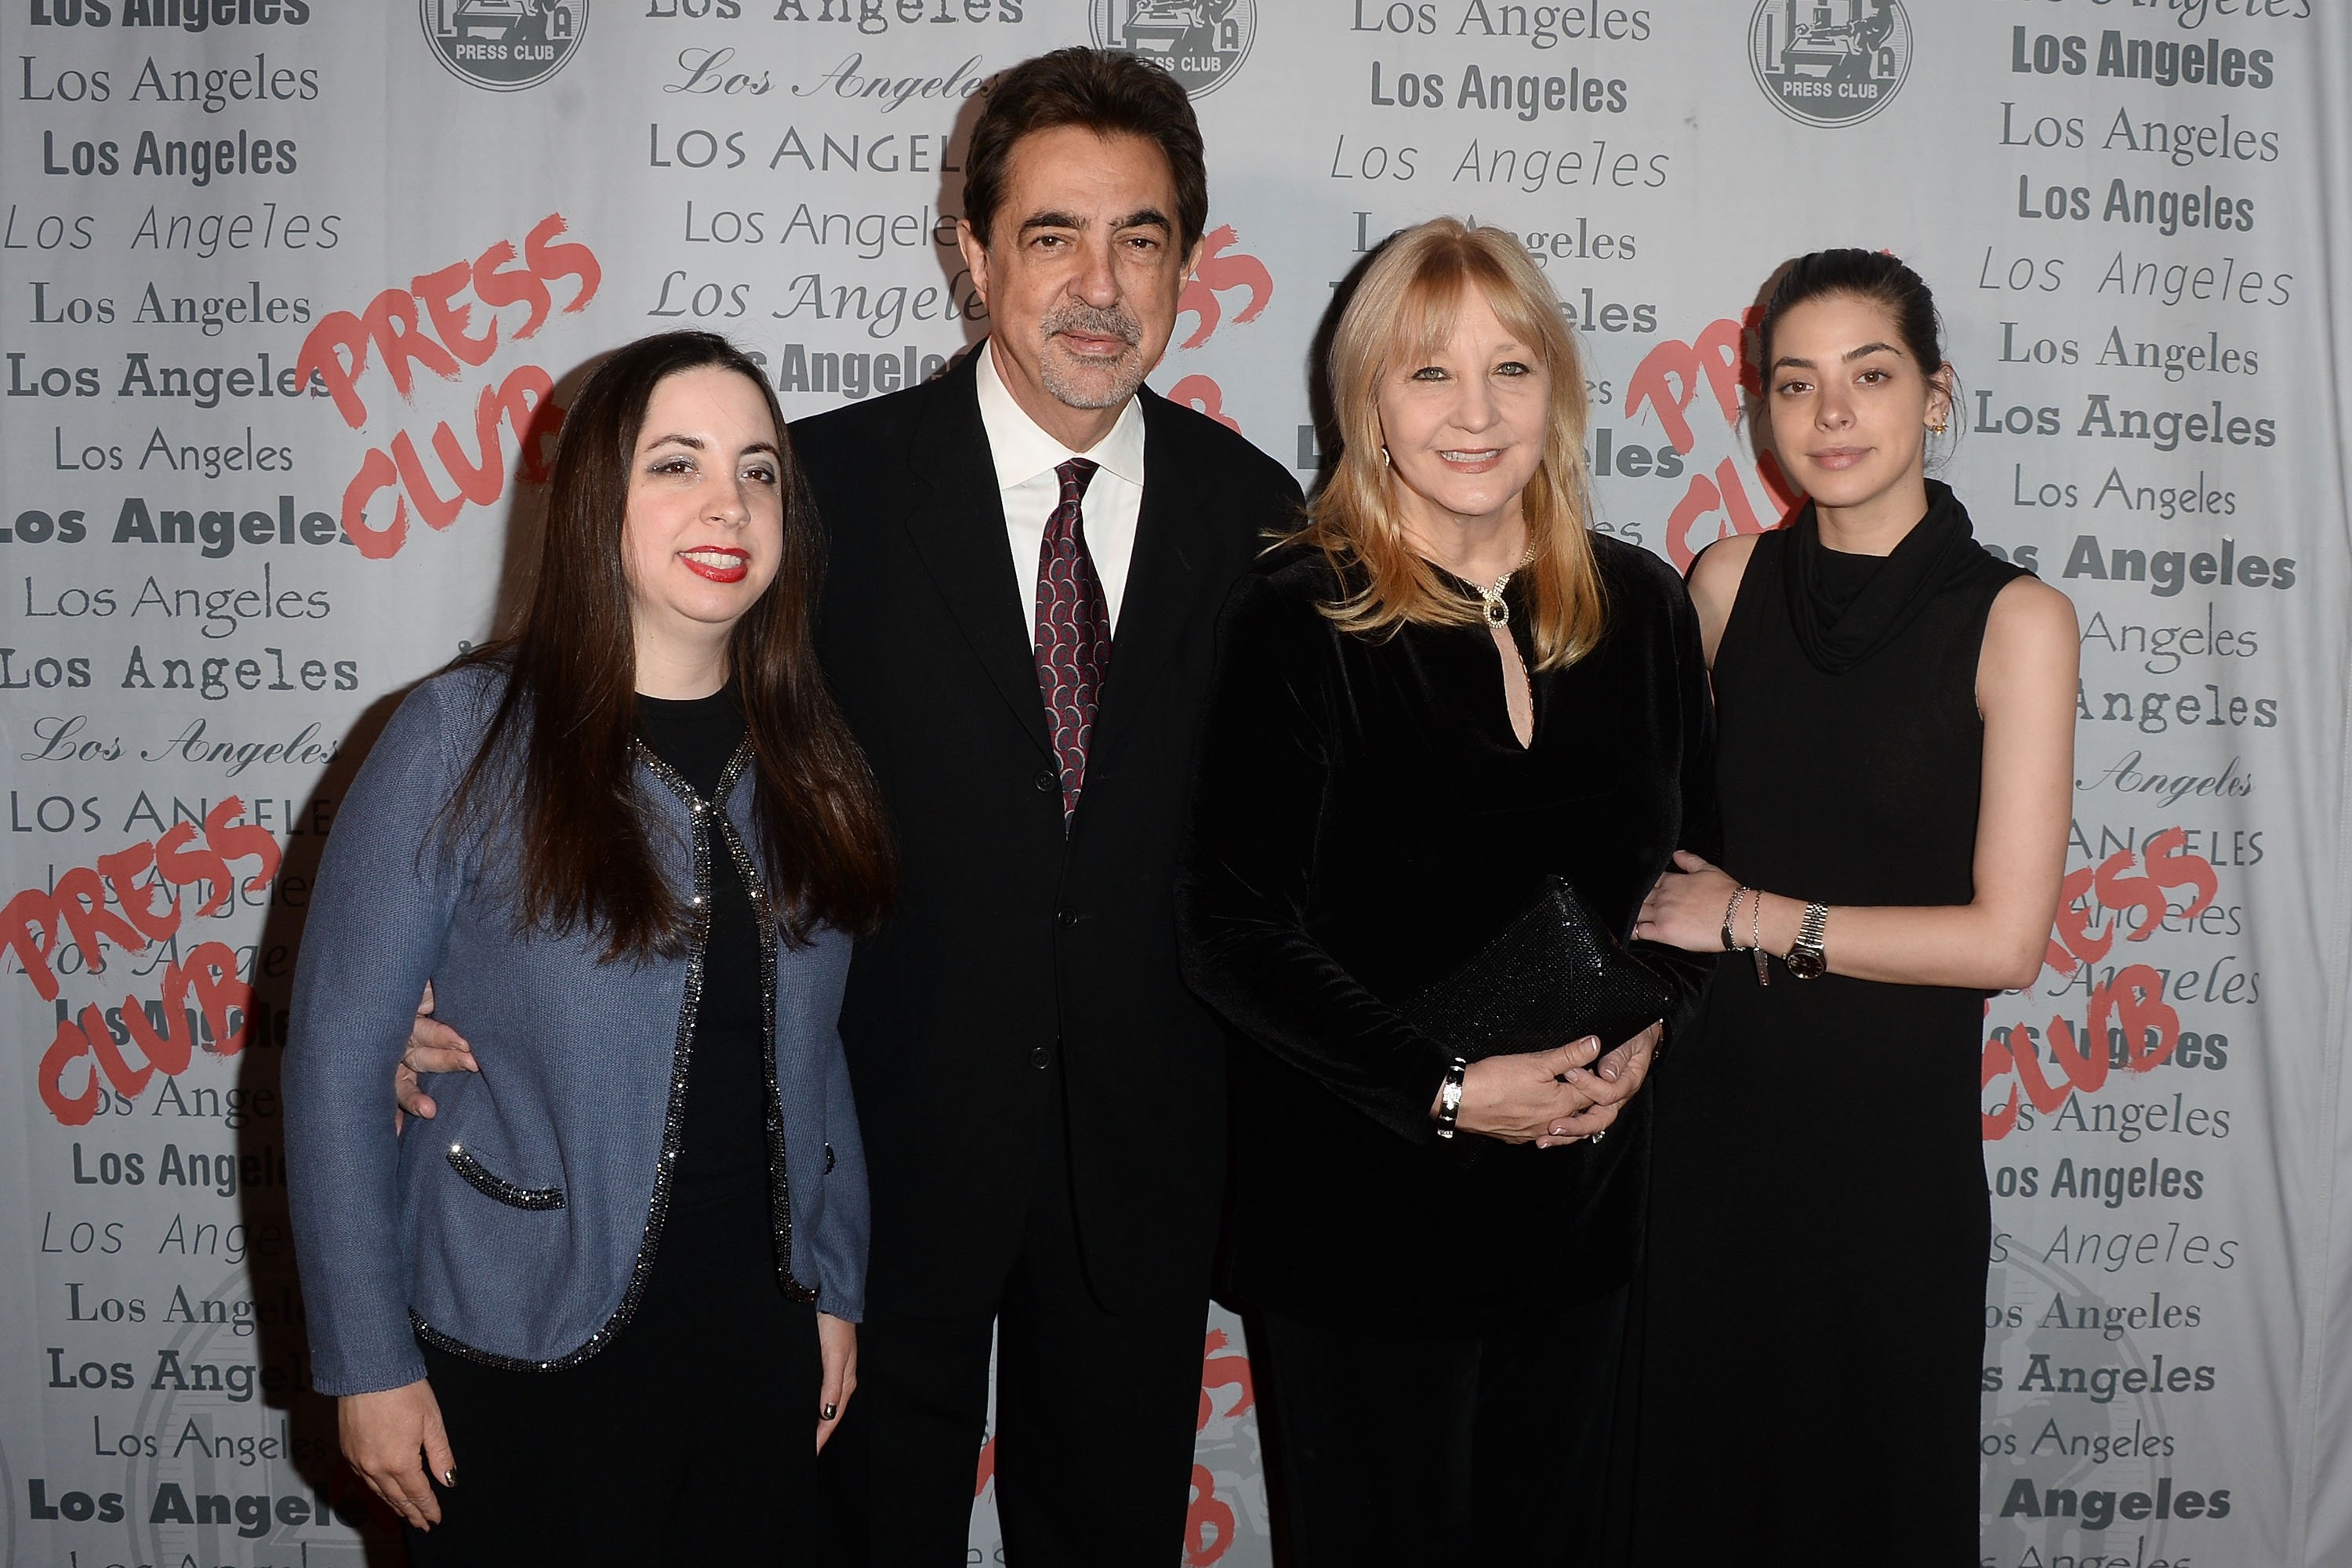 Mia Mantegna, Joe Mantegna, Arlene Vrhel, and Gia Mantegna arrive at the National Arts and Entertainment Journalism Awards Gala at Millennium Biltmore Hotel on December 6, 2015 in Los Angeles, California | Source: Getty Images